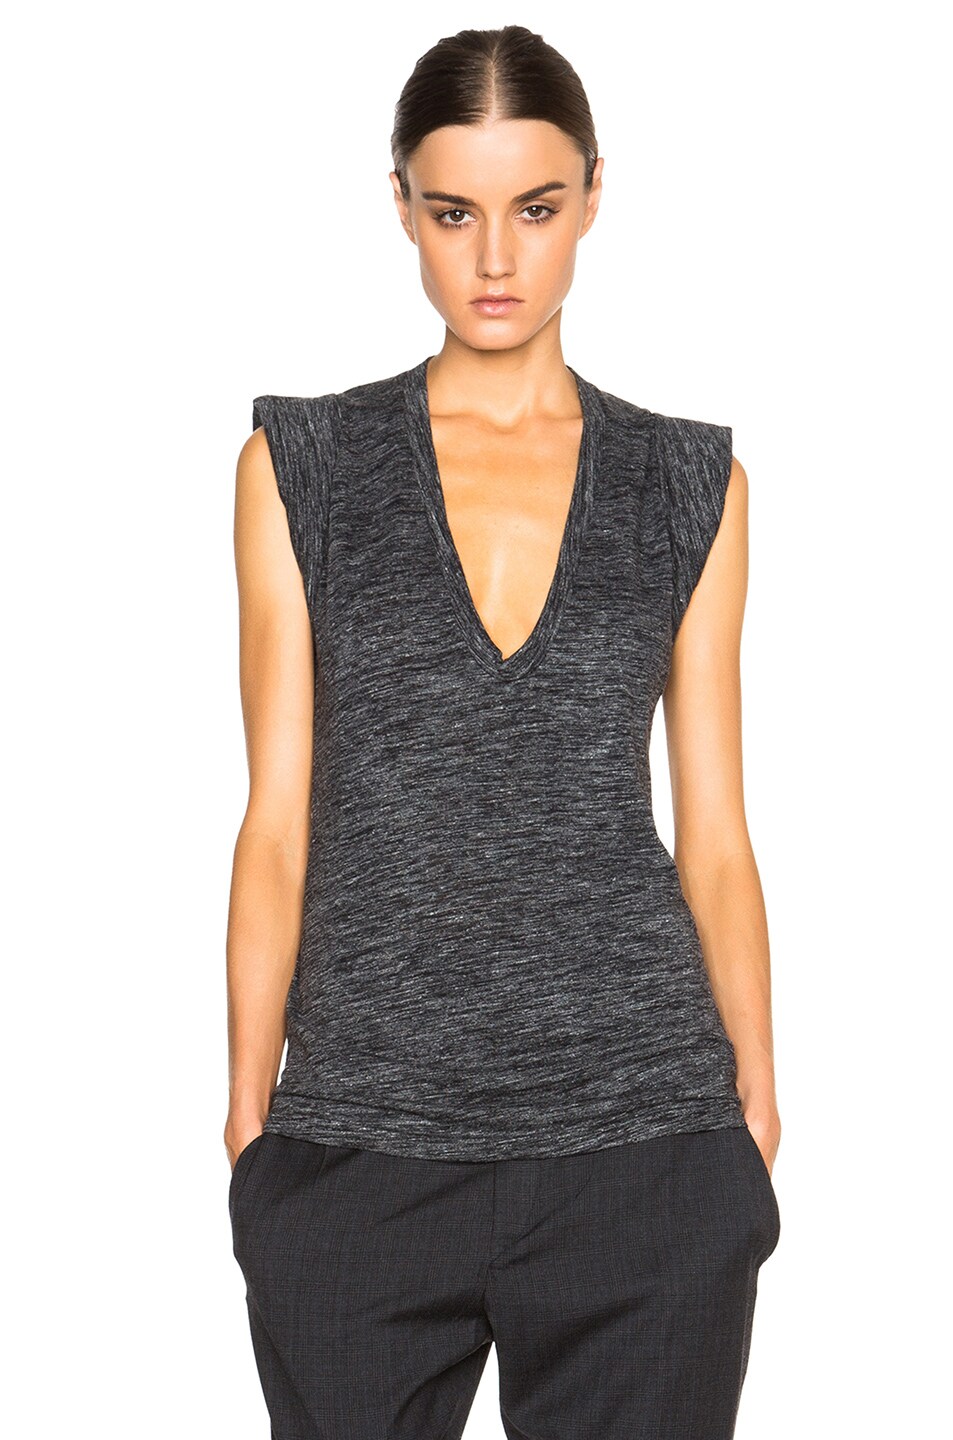 Isabel Marant Etoile Wenji Stretch Jersey Top in Anthracite | FWRD